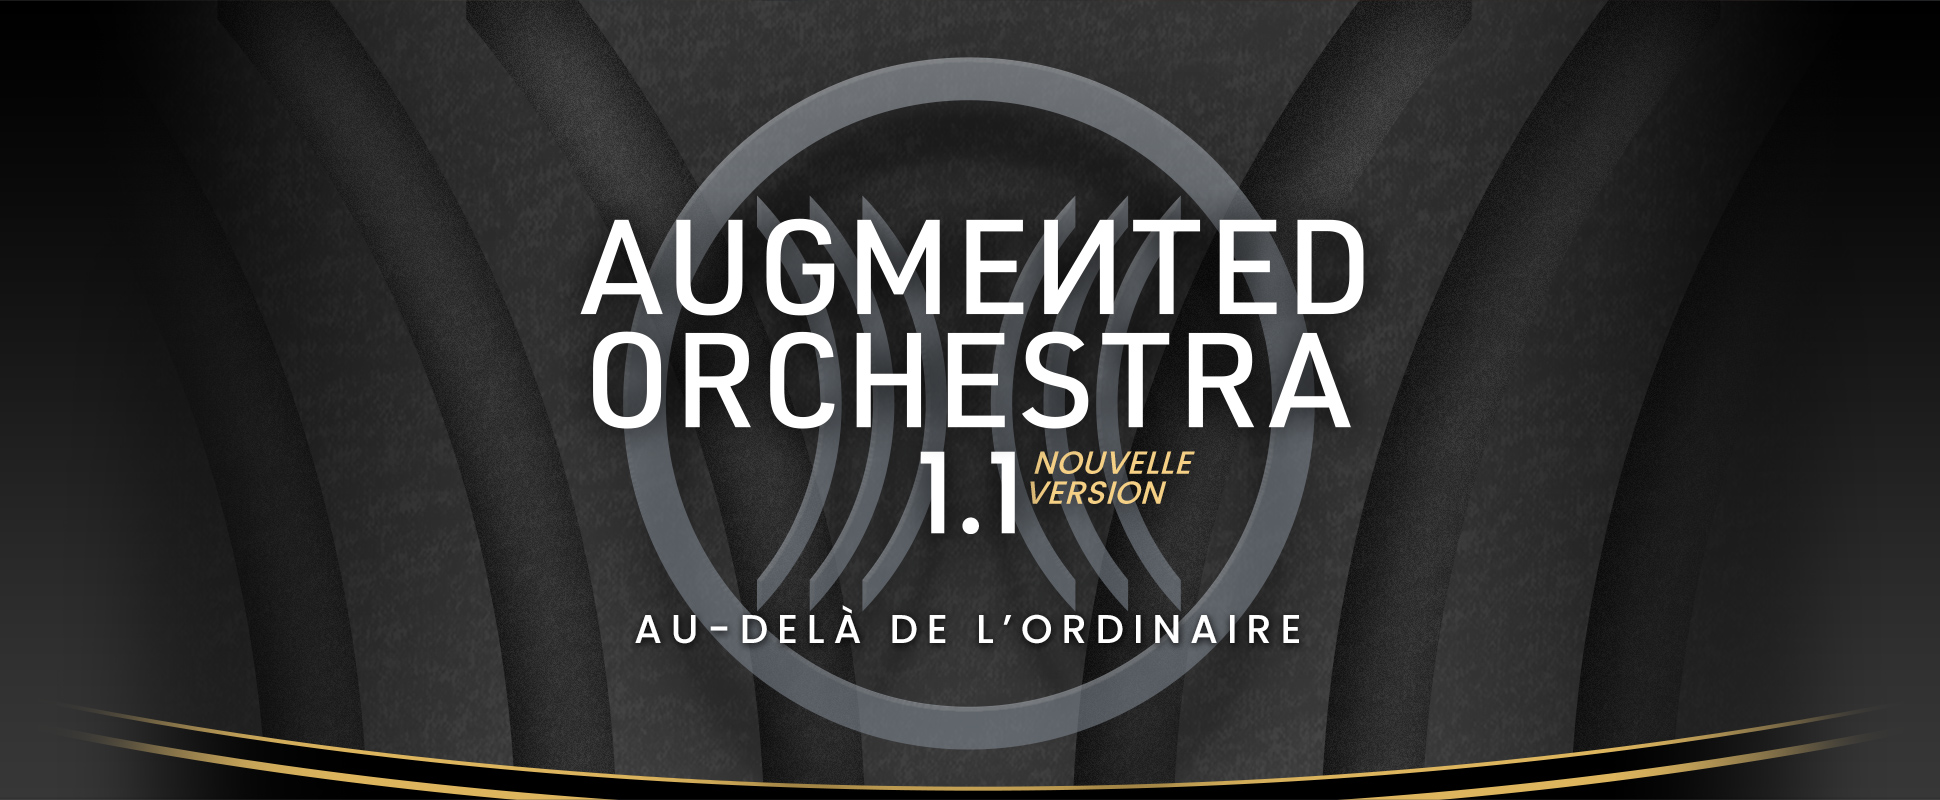 Augmented Orchestra 1.1 - Special offer